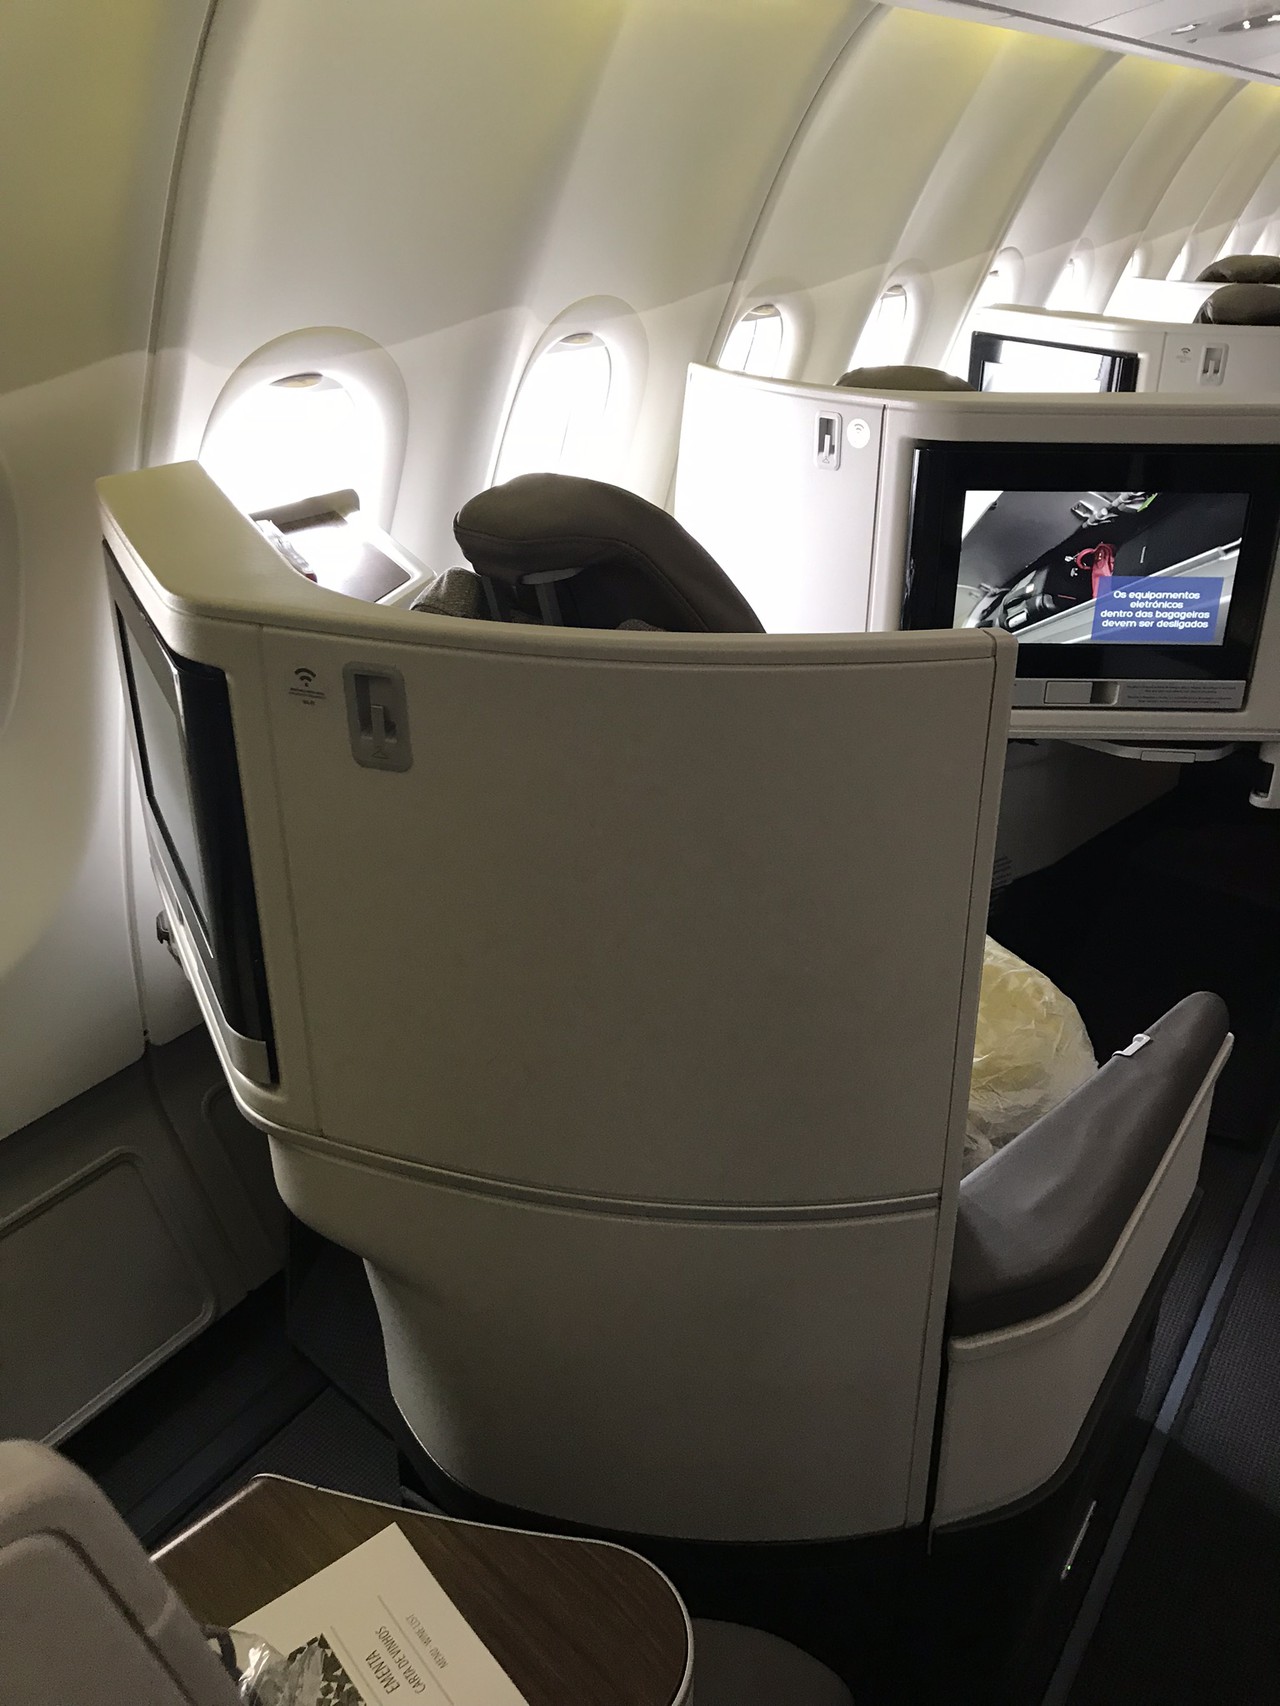 Review of TAP Air Portugal flight from Lisbon to Miami in Business